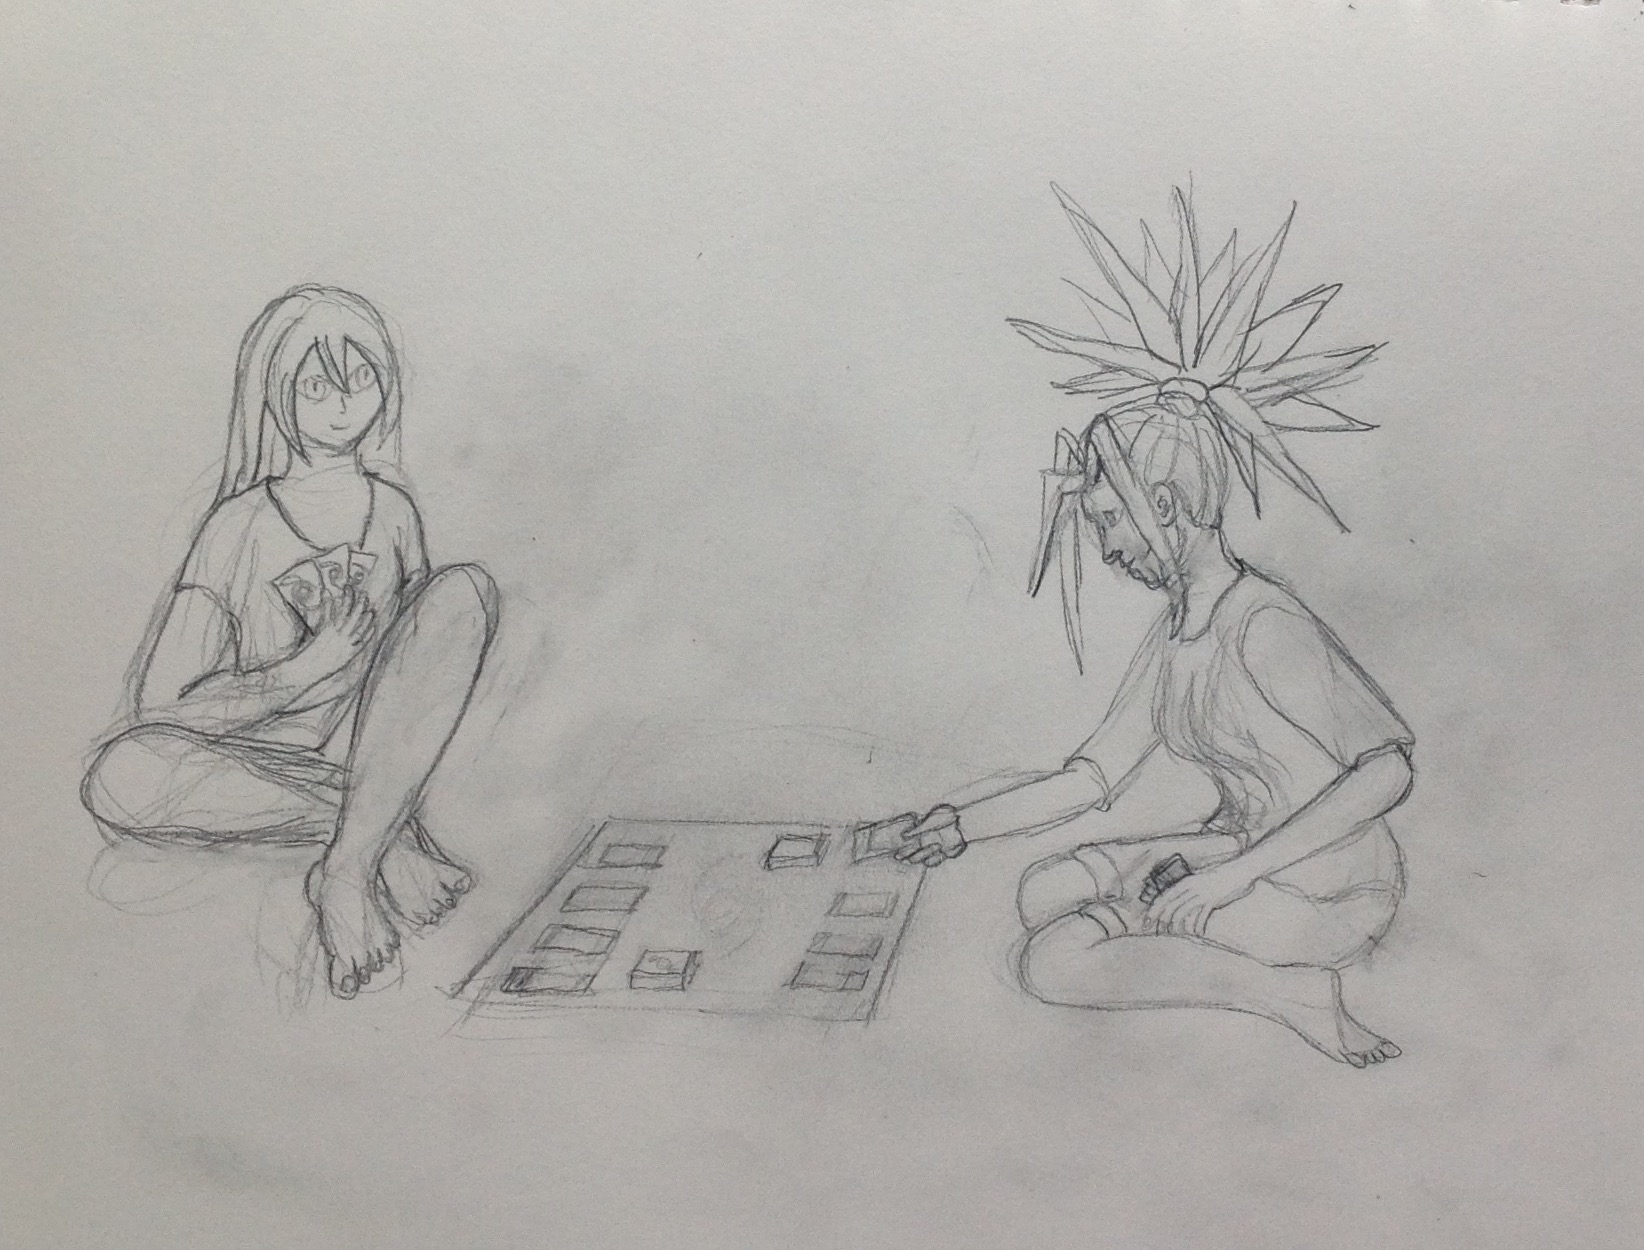 NaniAlexis playing cards with Sais by Jadis